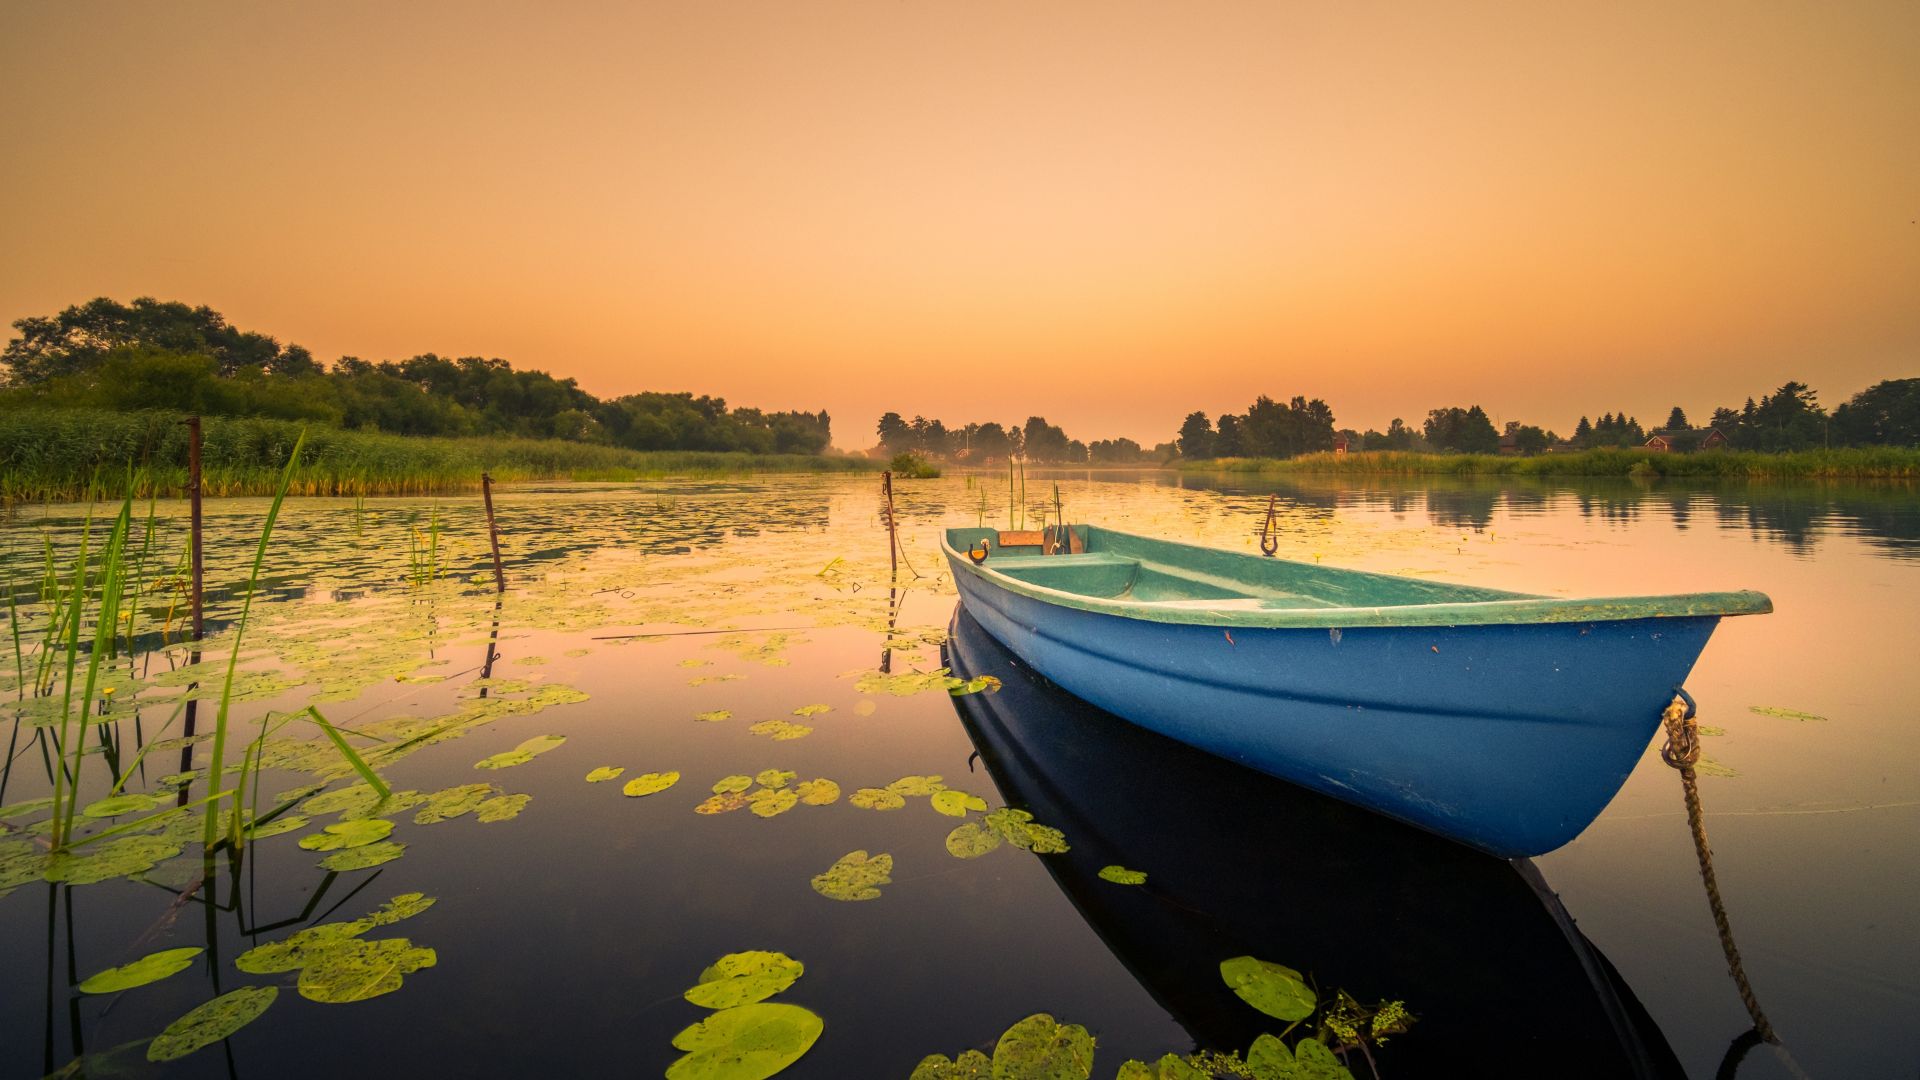 Wallpaper Boat, lily flowers on water, lake, sunset